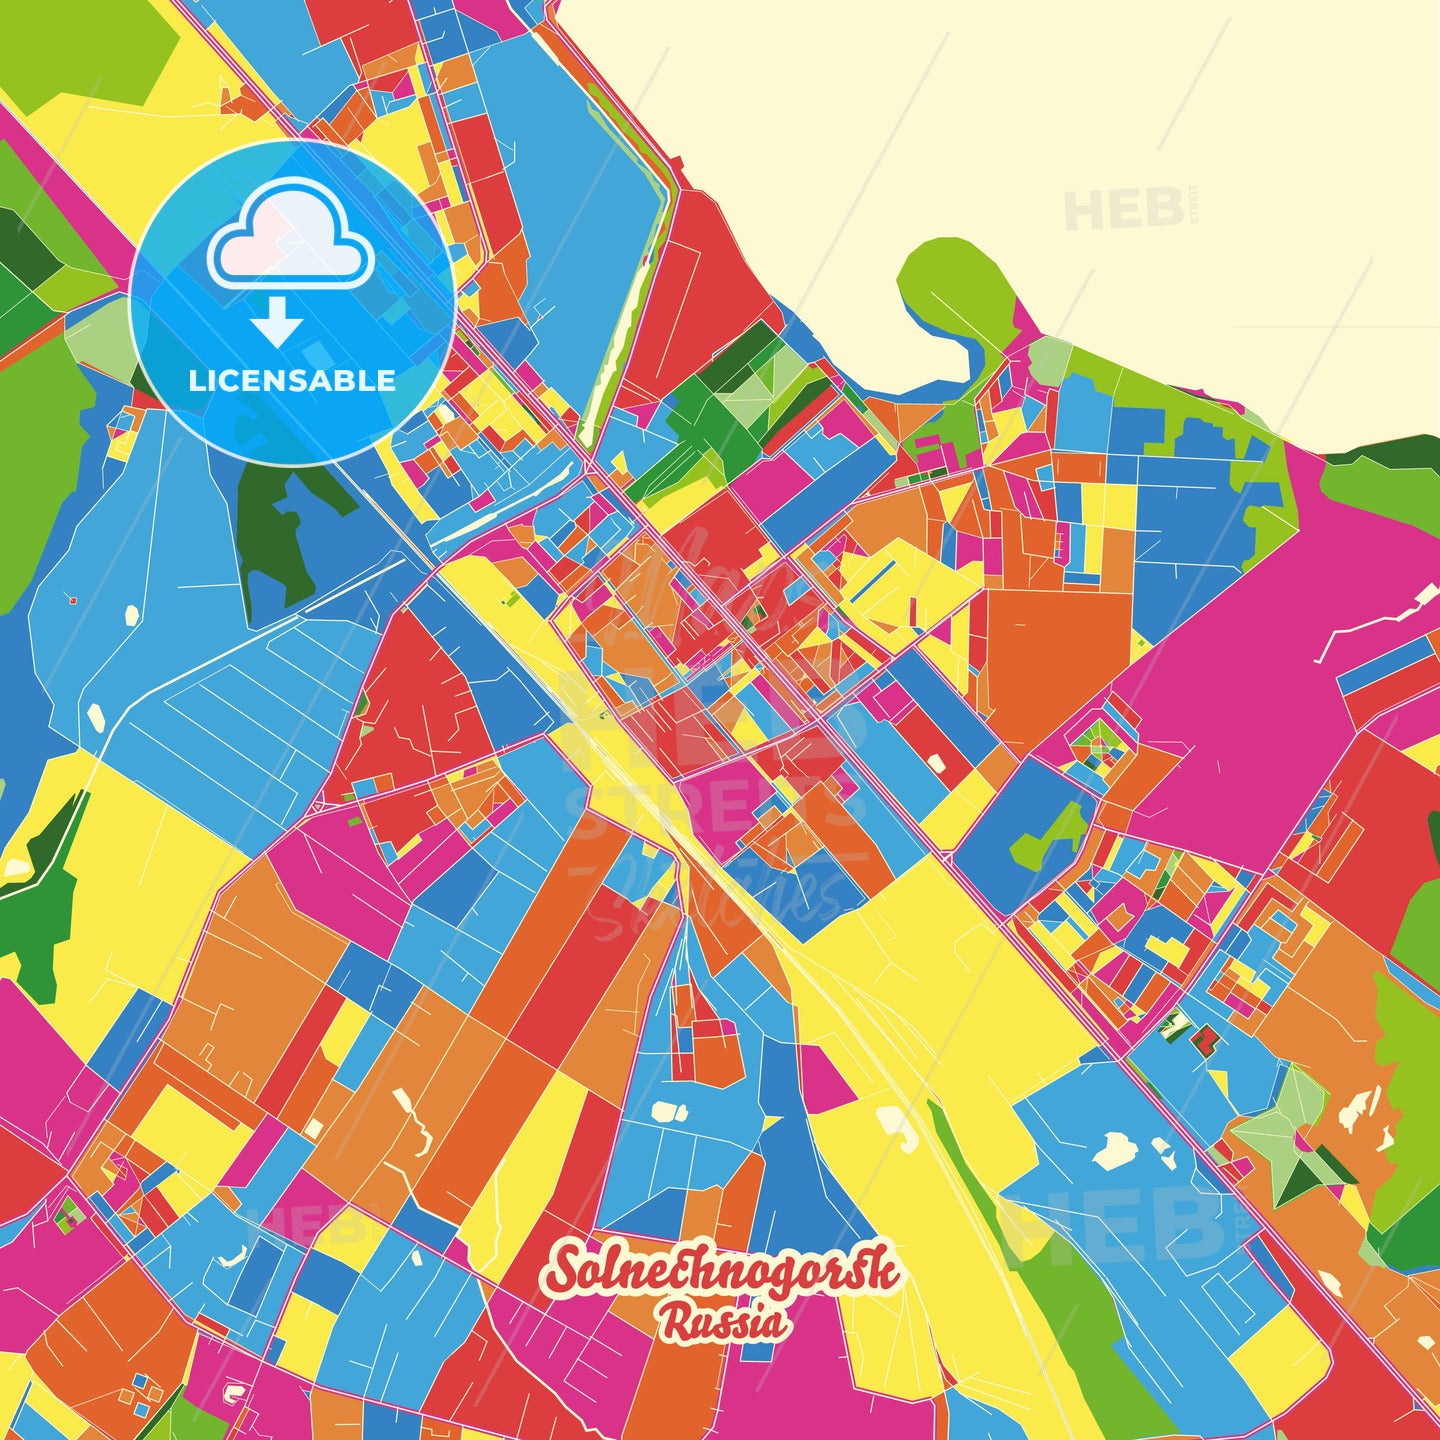 Solnechnogorsk, Russia Crazy Colorful Street Map Poster Template - HEBSTREITS Sketches